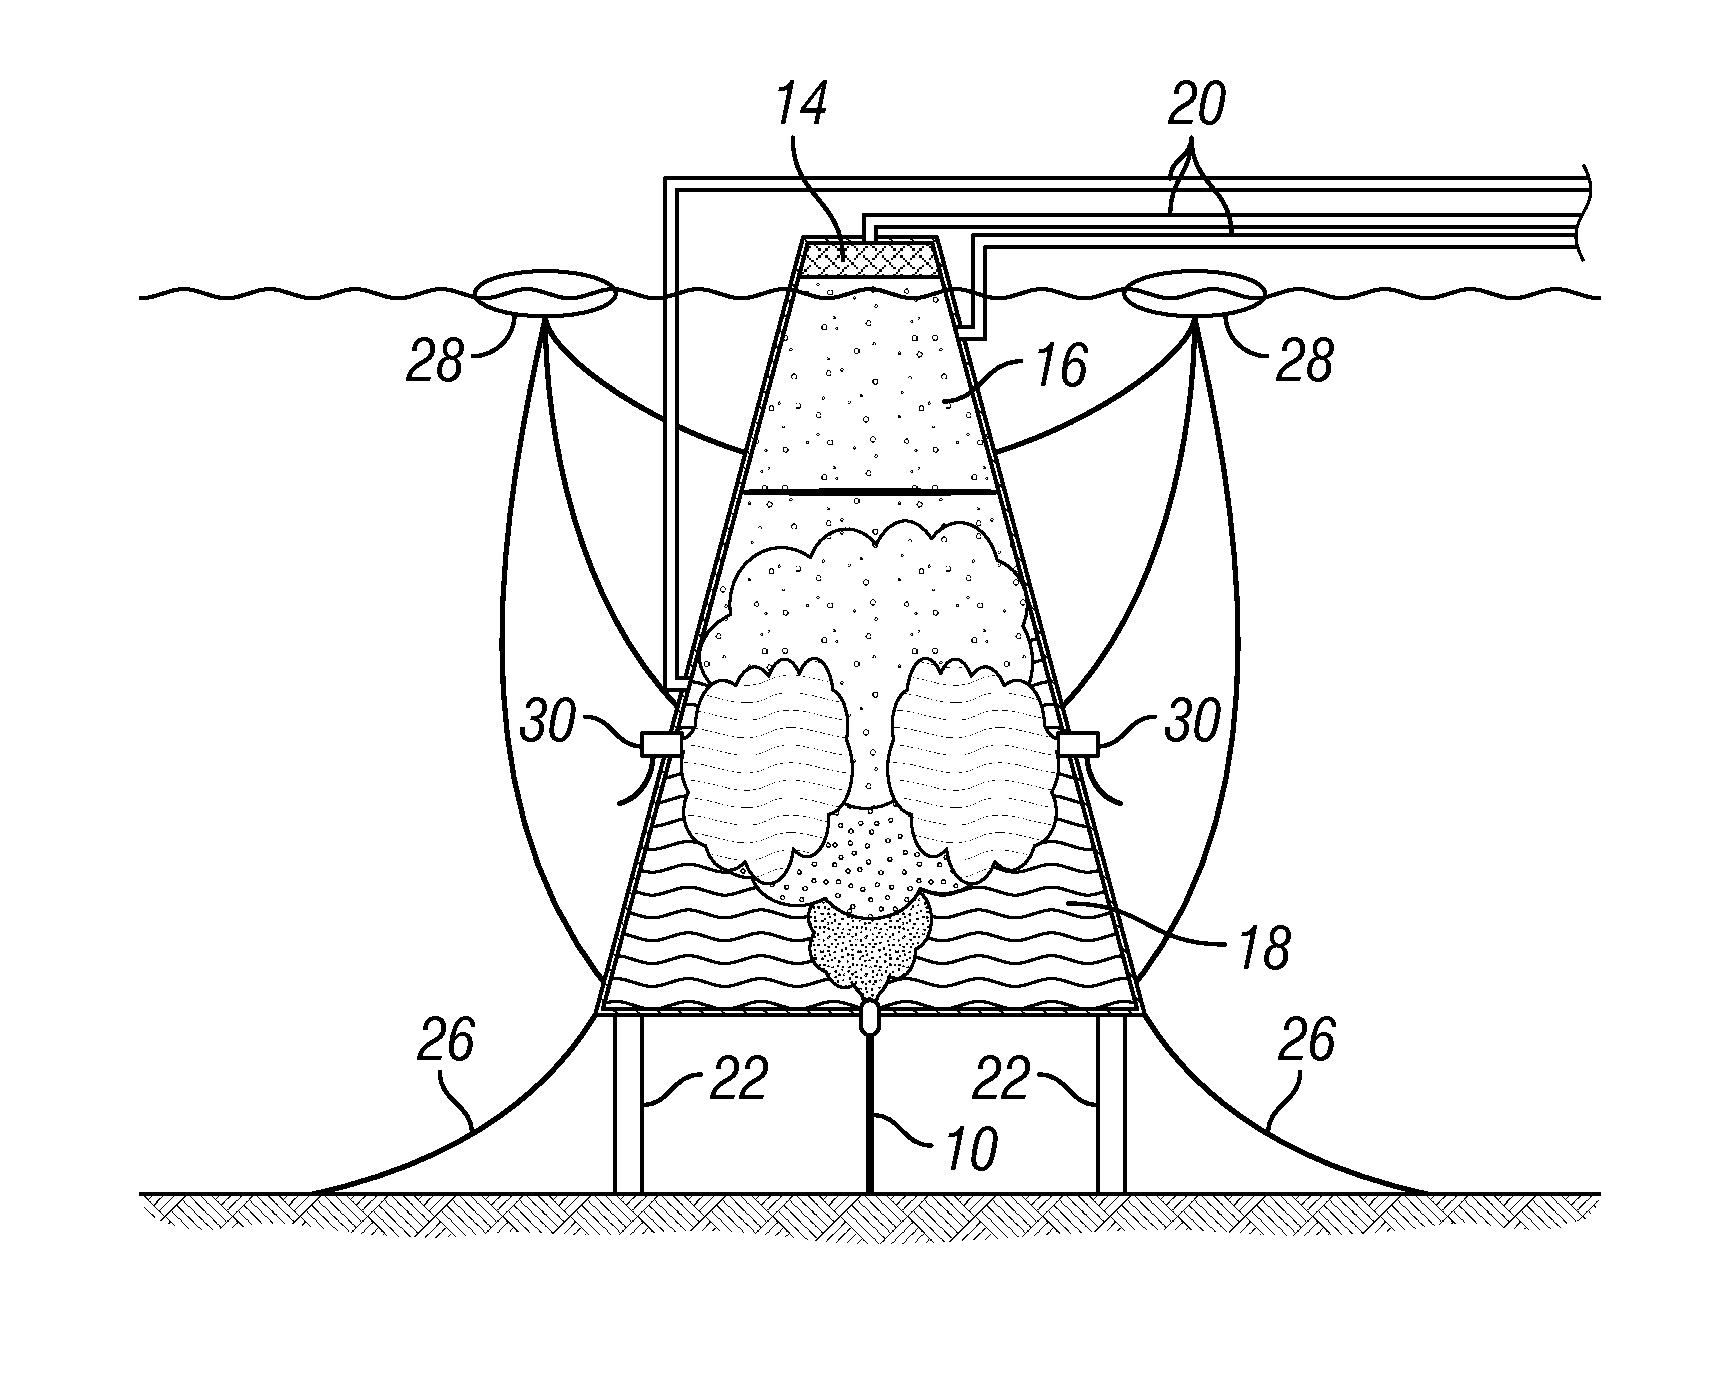 Apparatus and method for producing oil and gas using buoyancy effect